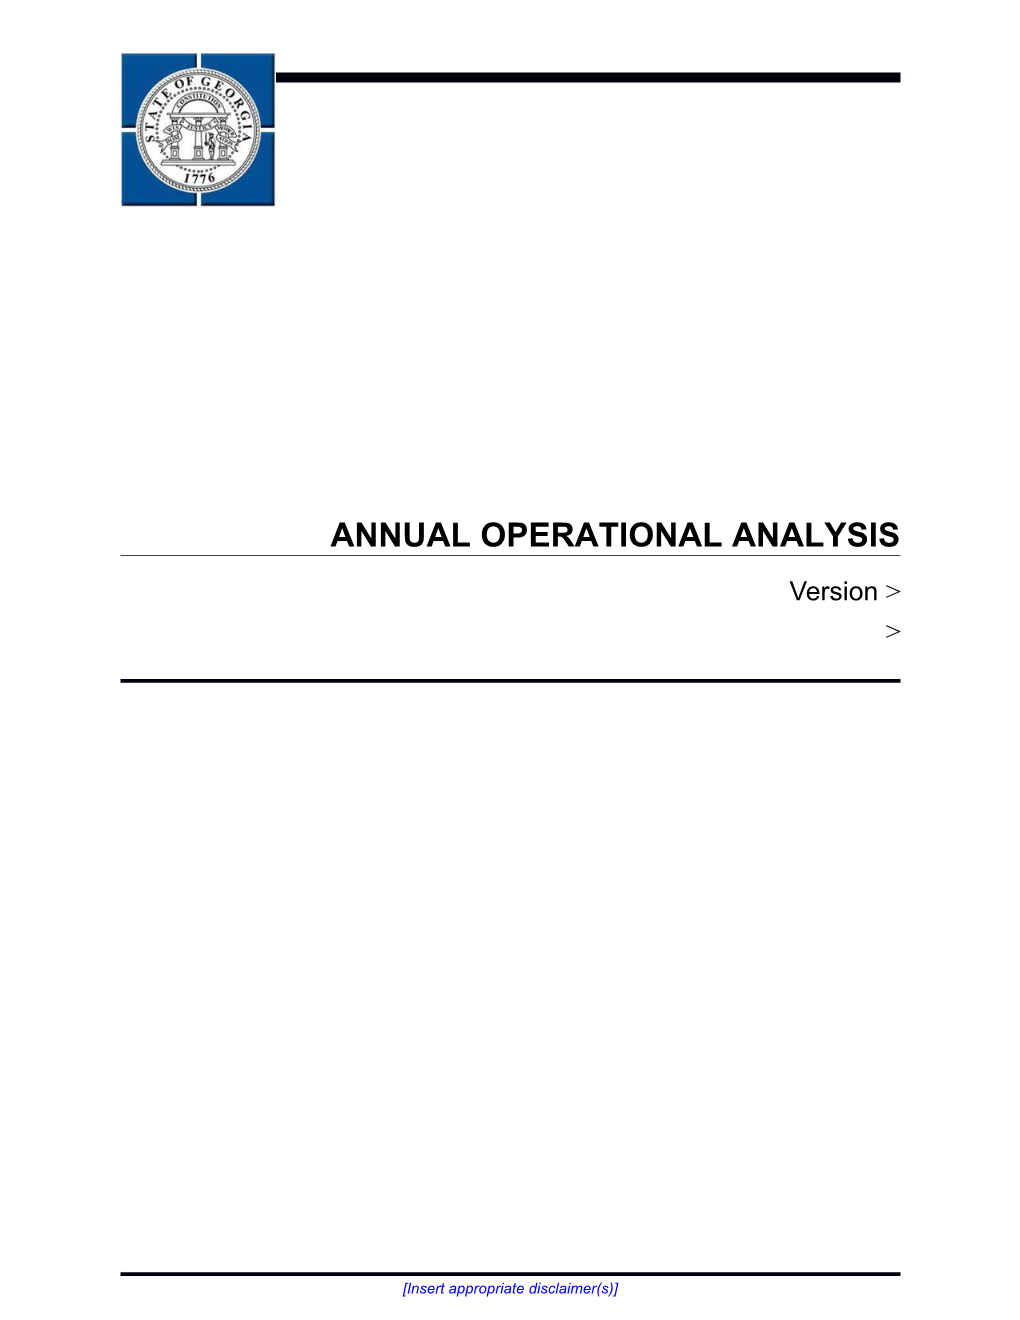 Annual Operational Analysis